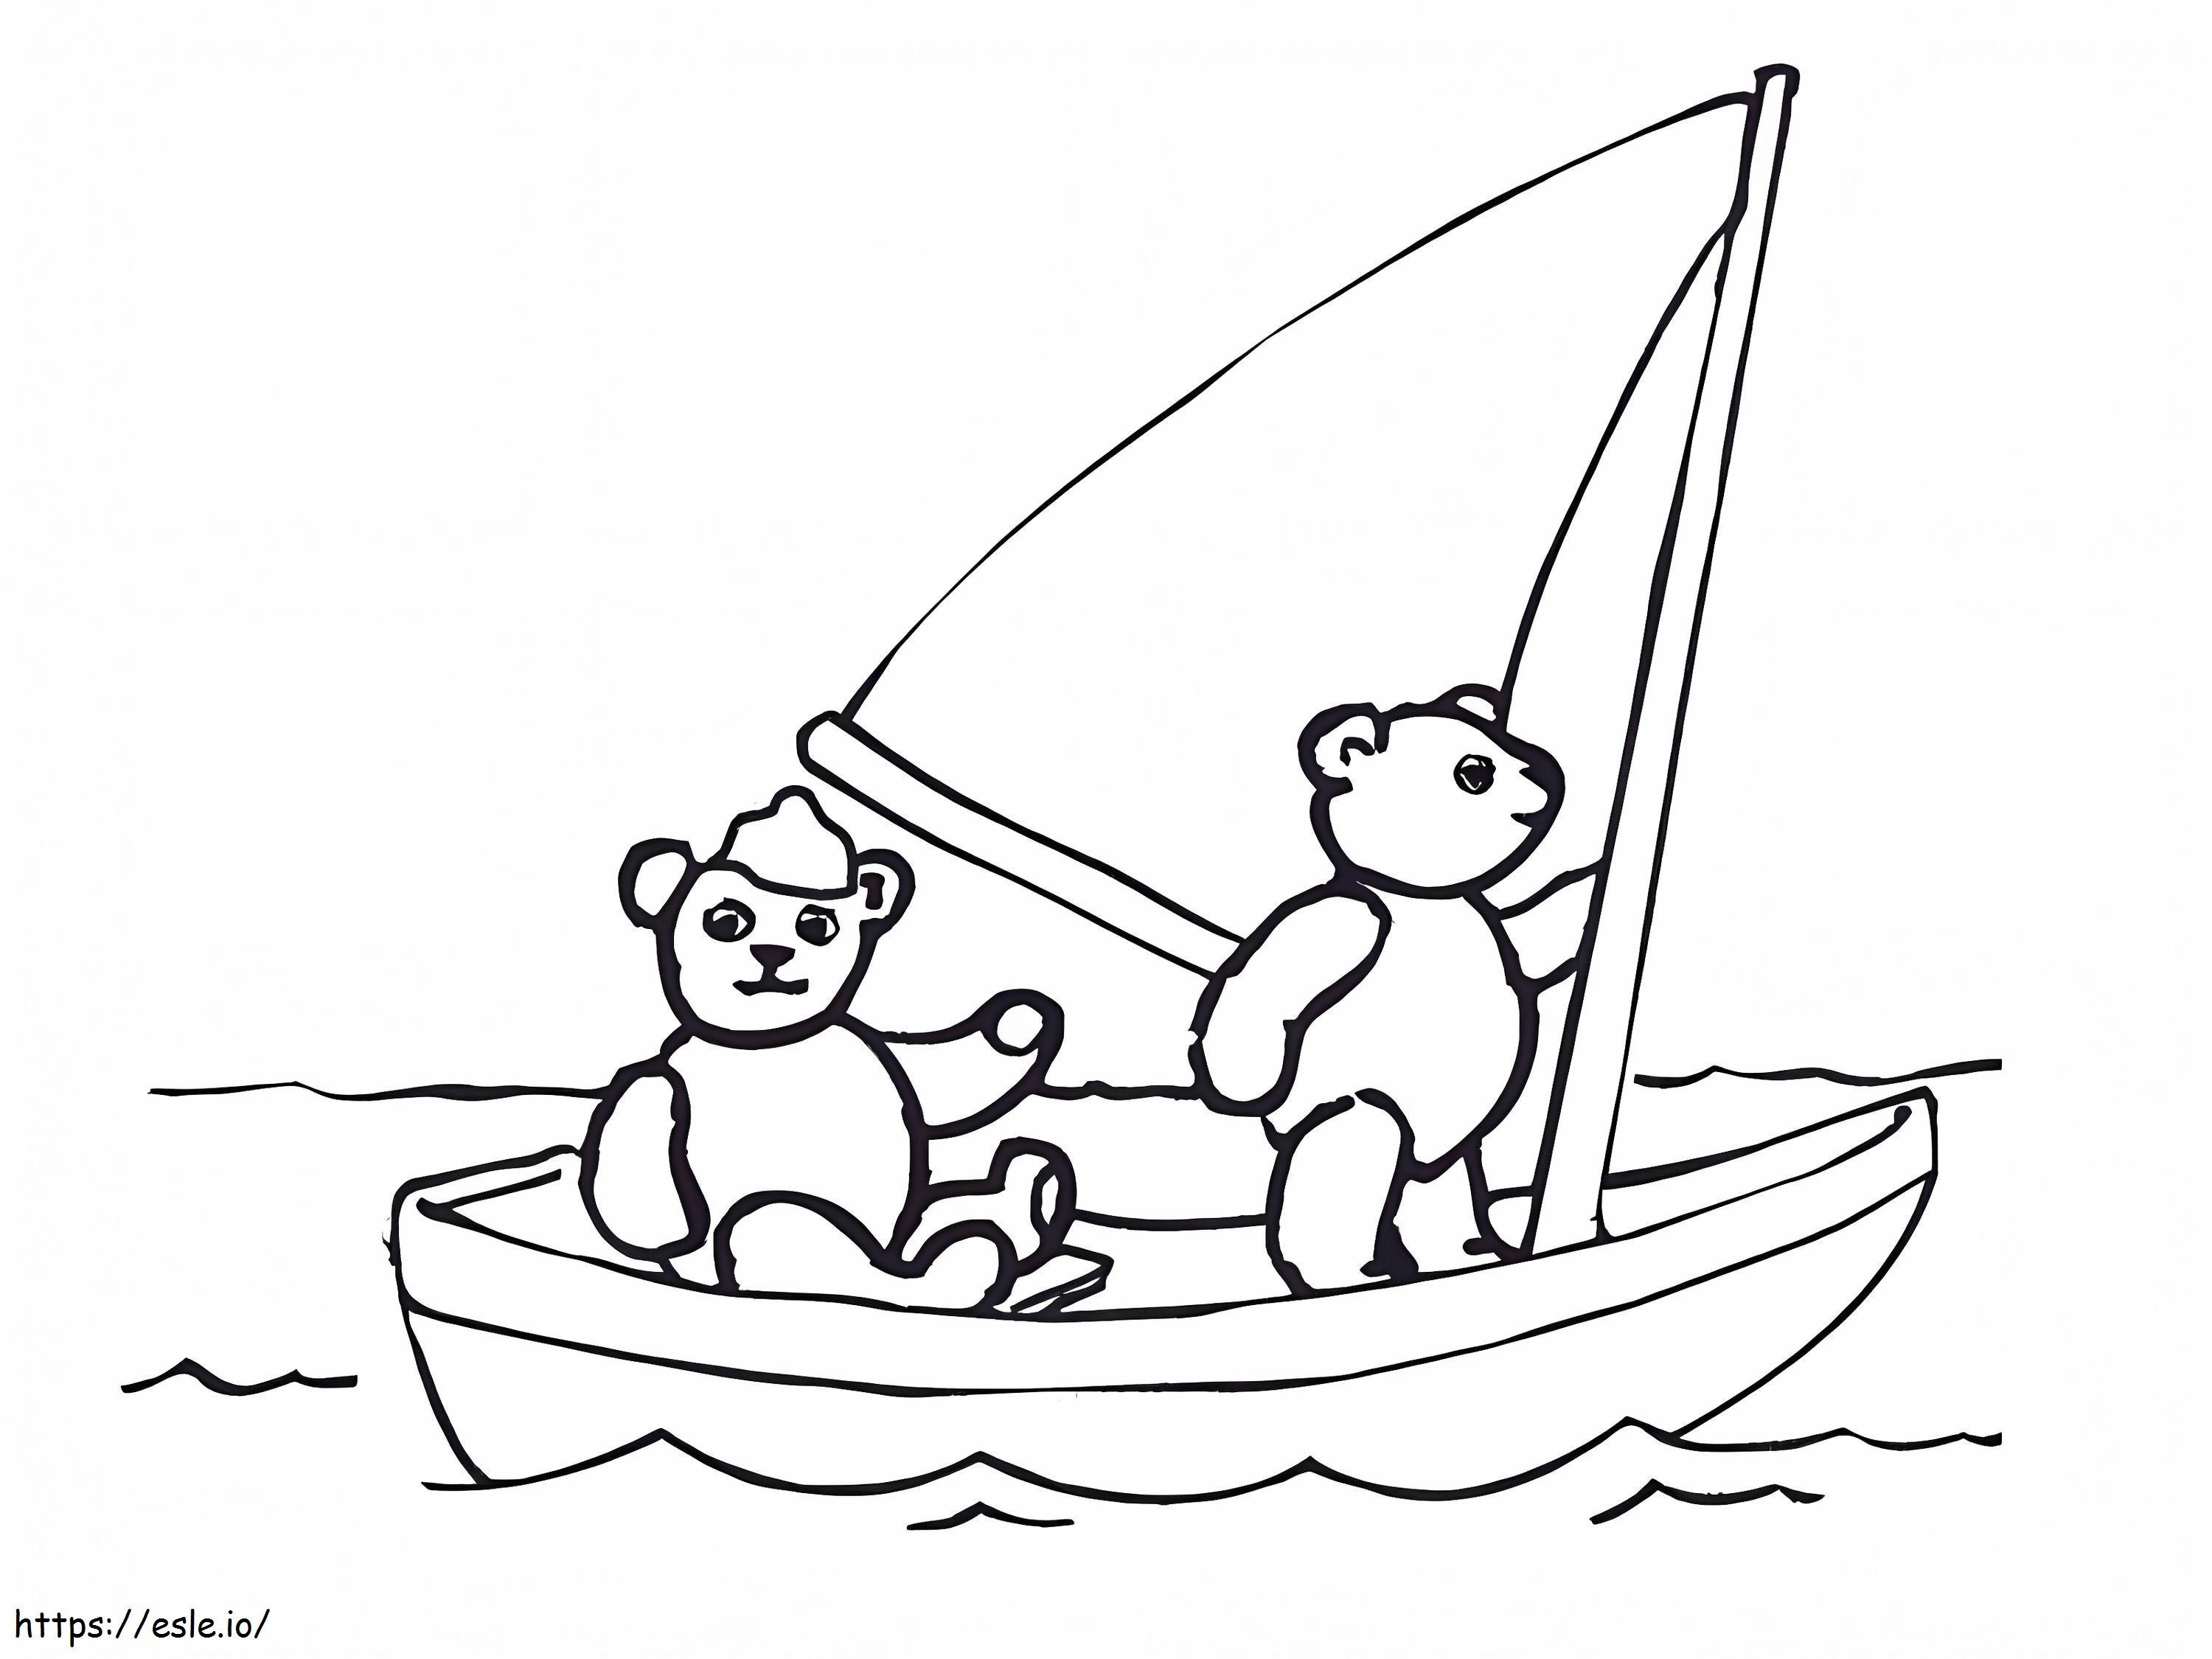 Teddy Bears On A Sailboat coloring page